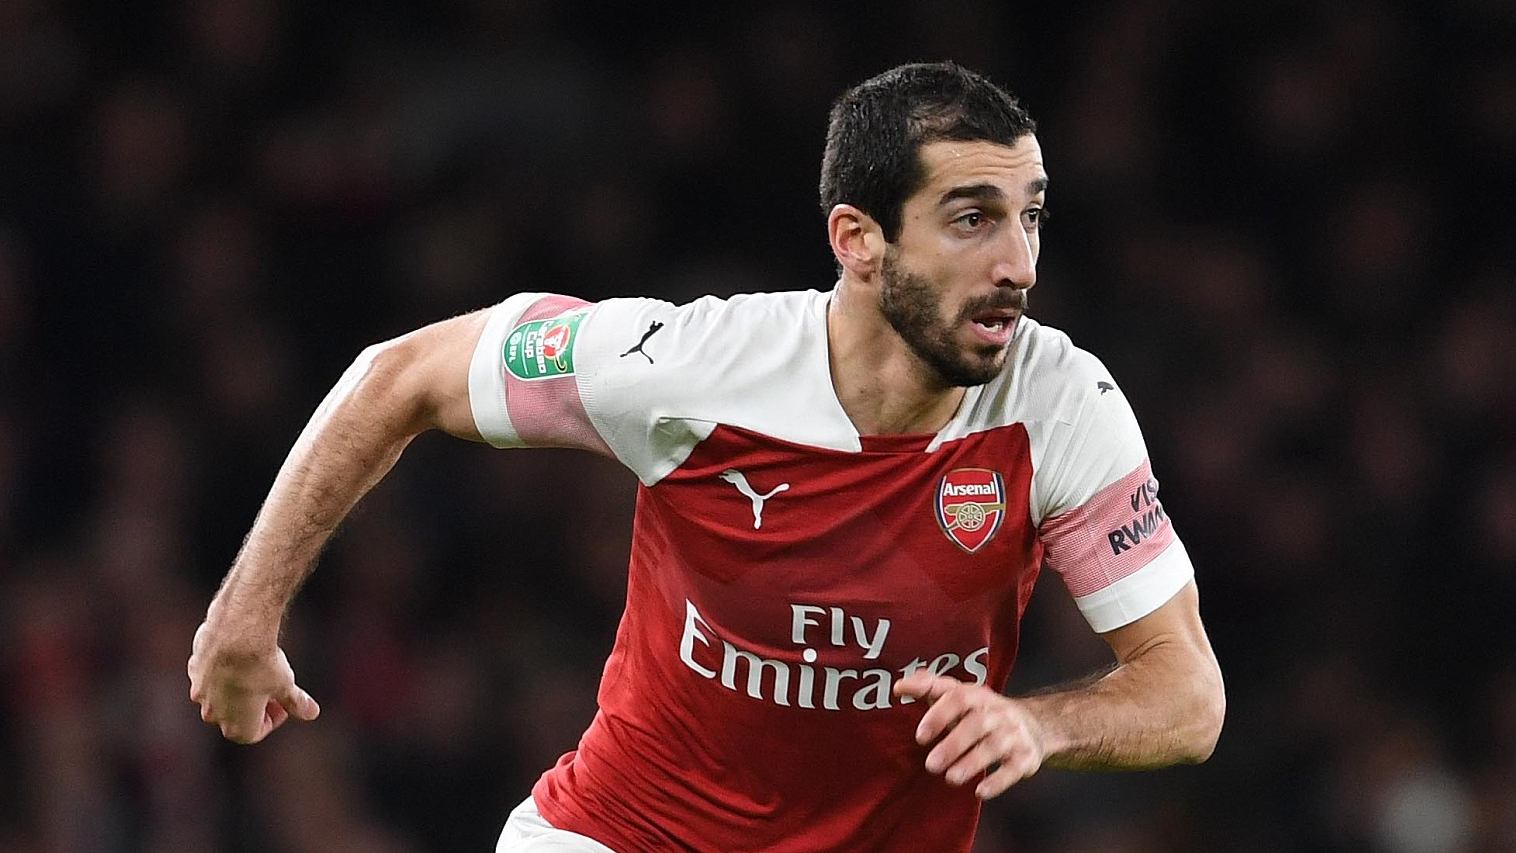 Arsenal confirm Mkhitaryan to miss six weeks with foot injury